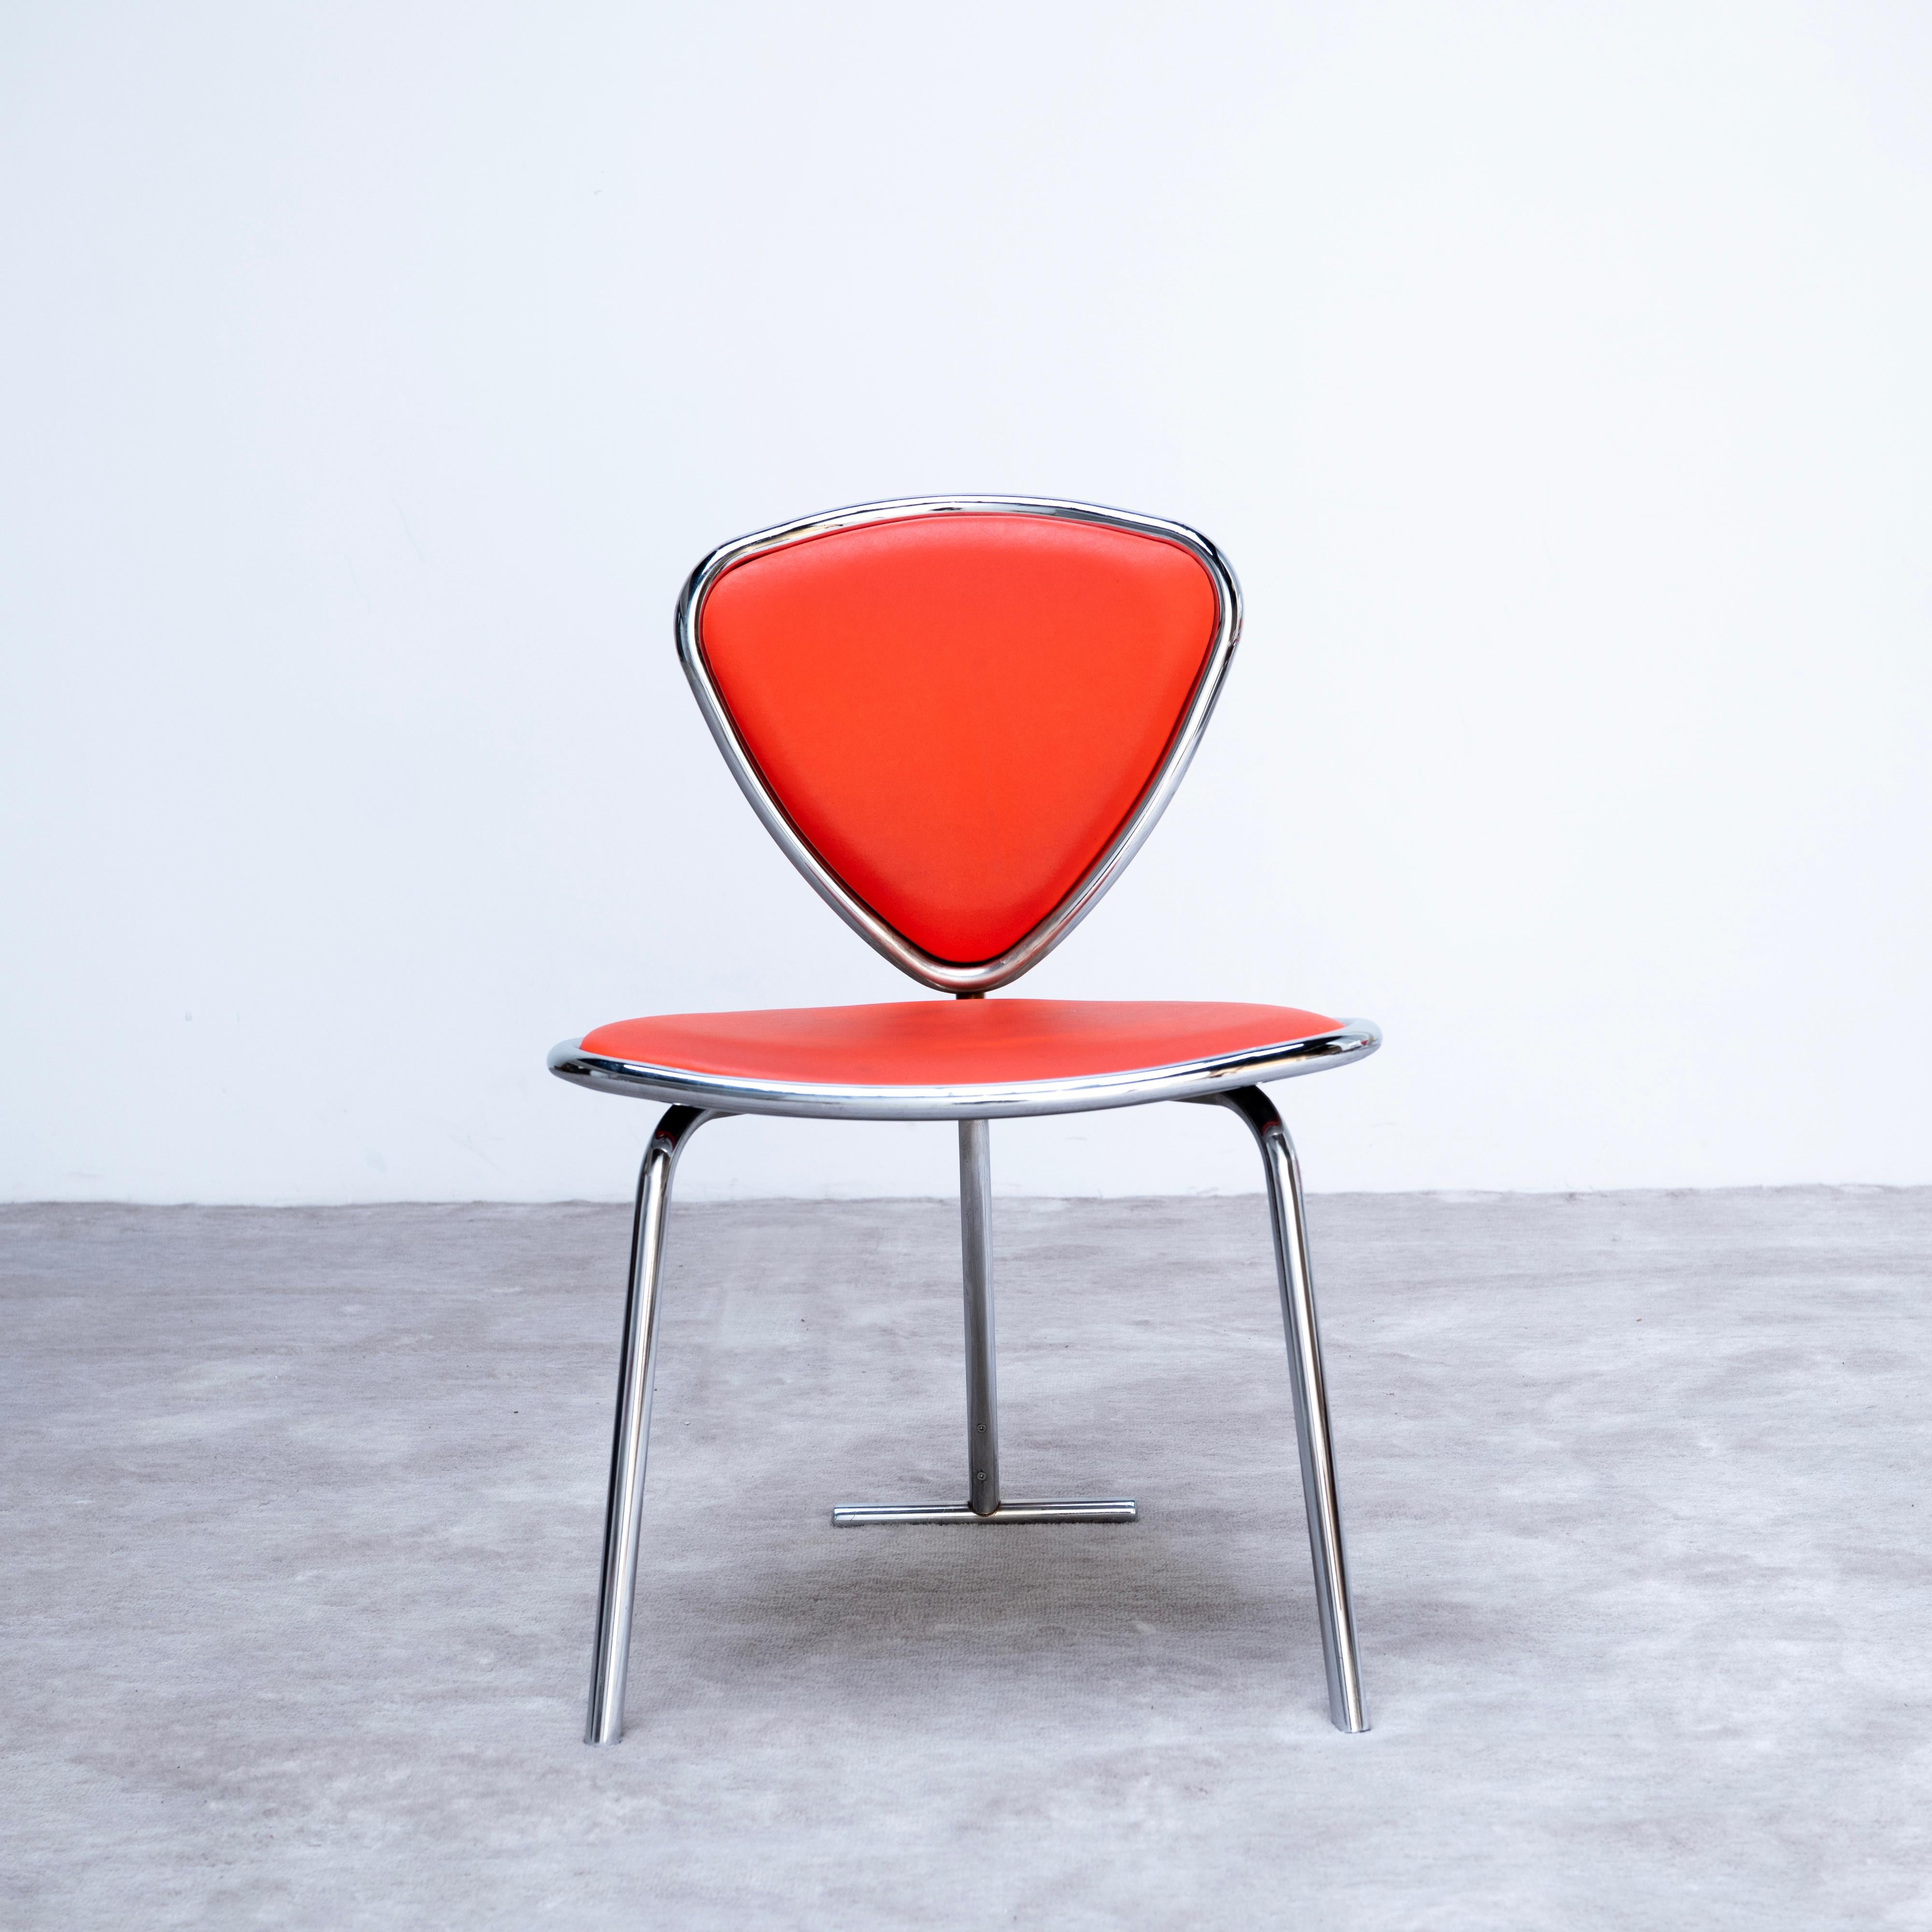 Dning chair From French Institute of Japan - Tokyo by Claudio Colucci 1